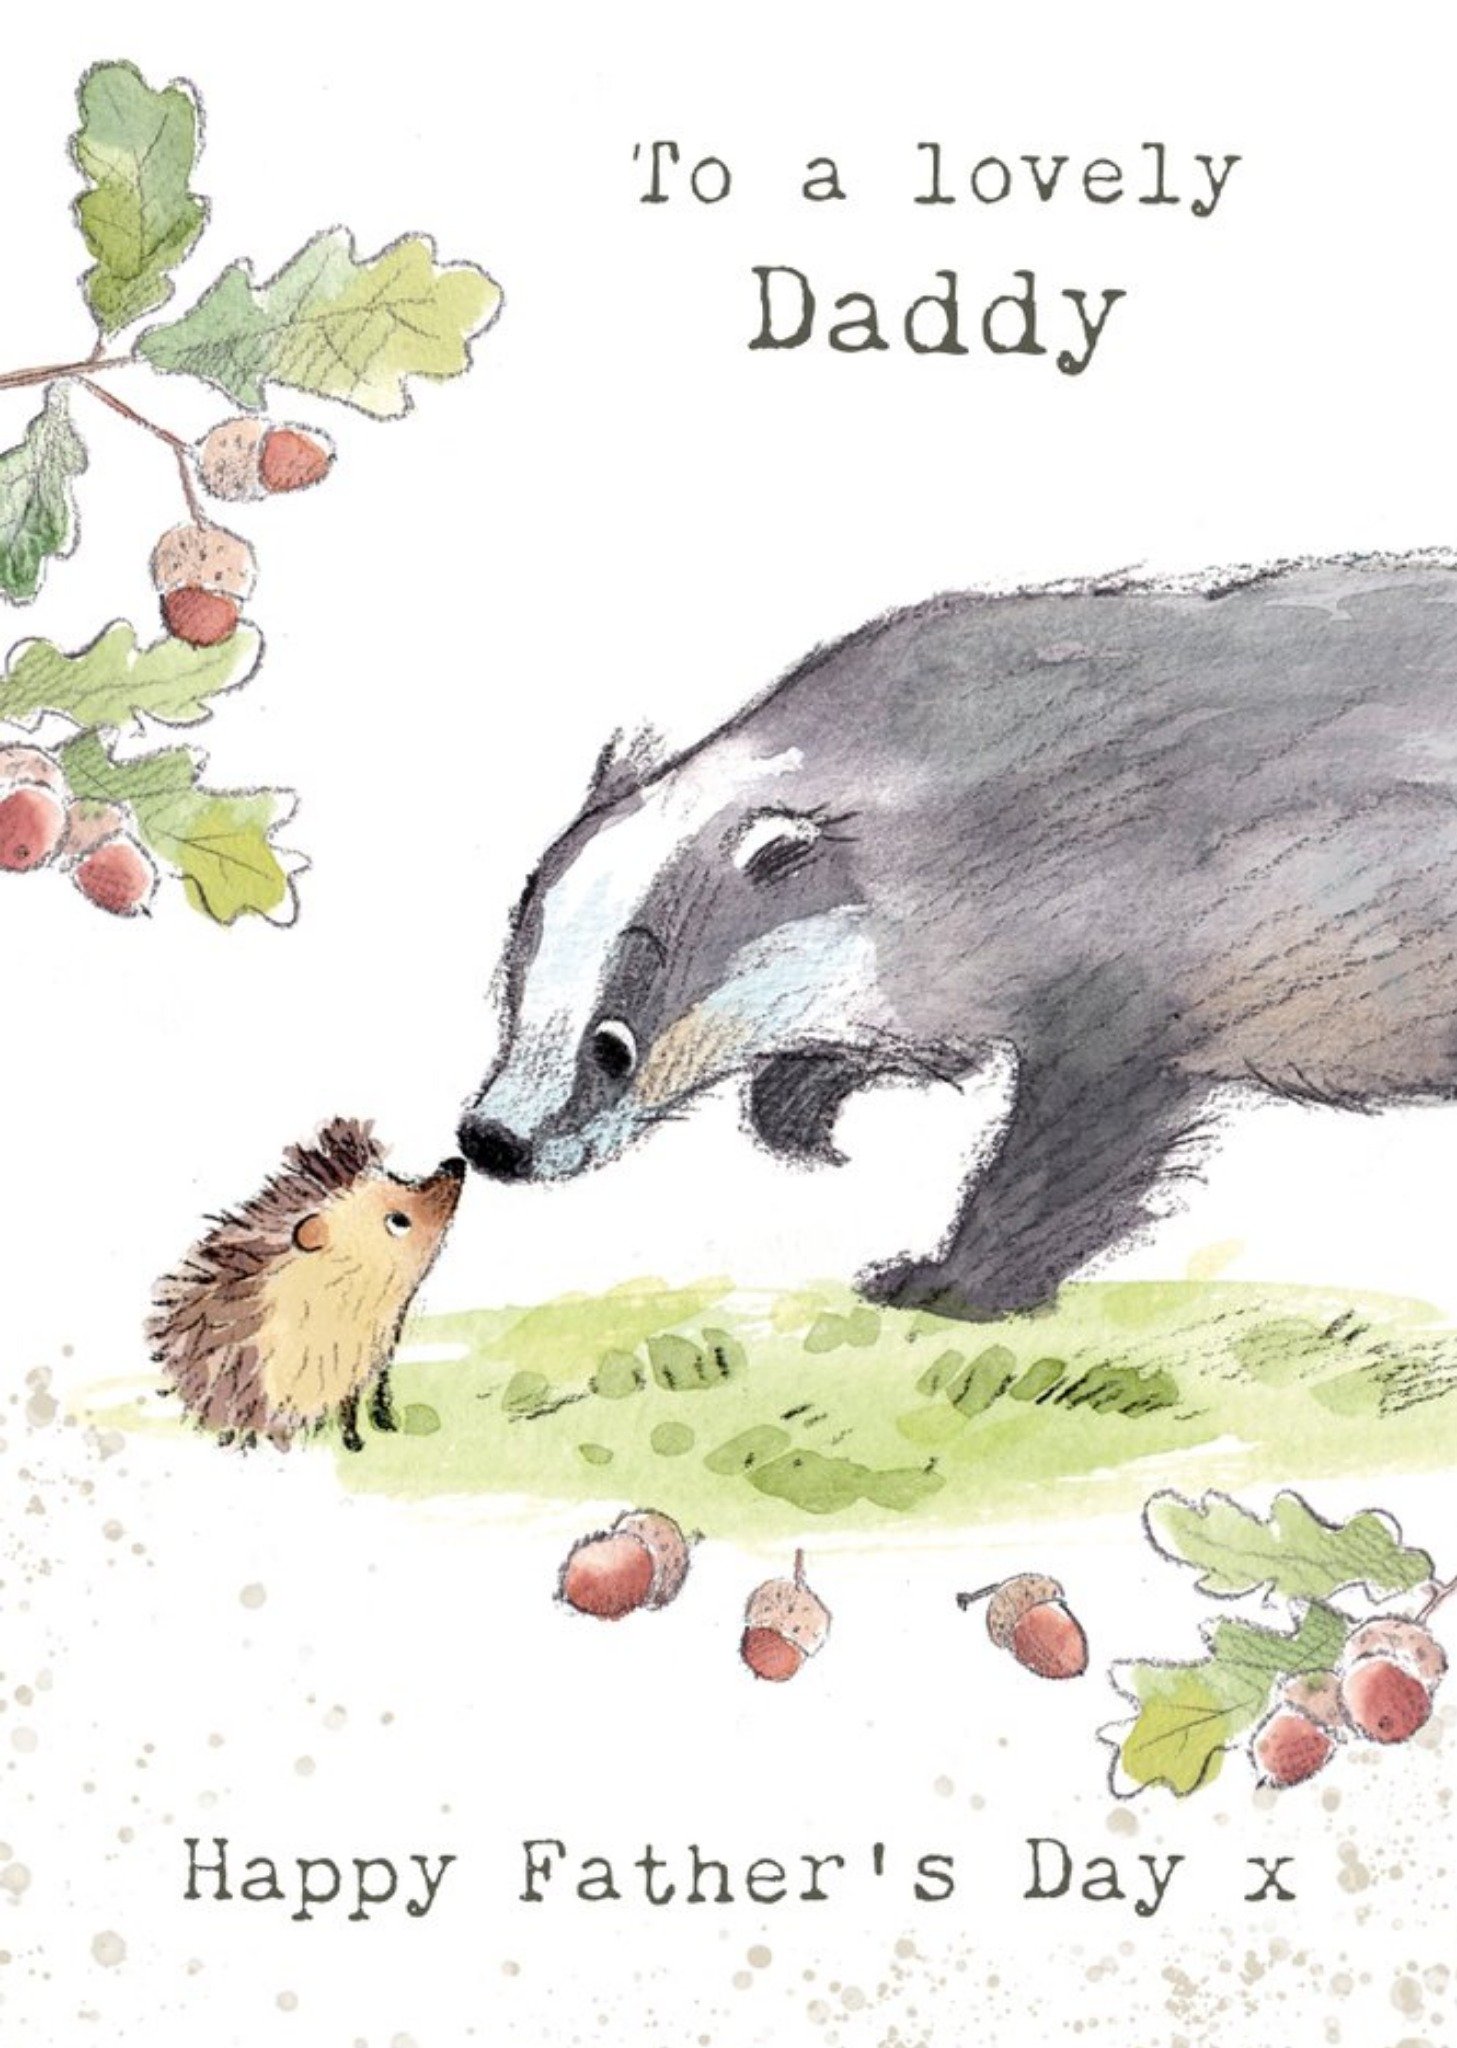 Moonpig Illustration Of A Badger And A Hedgehog Father's Day Card, Large